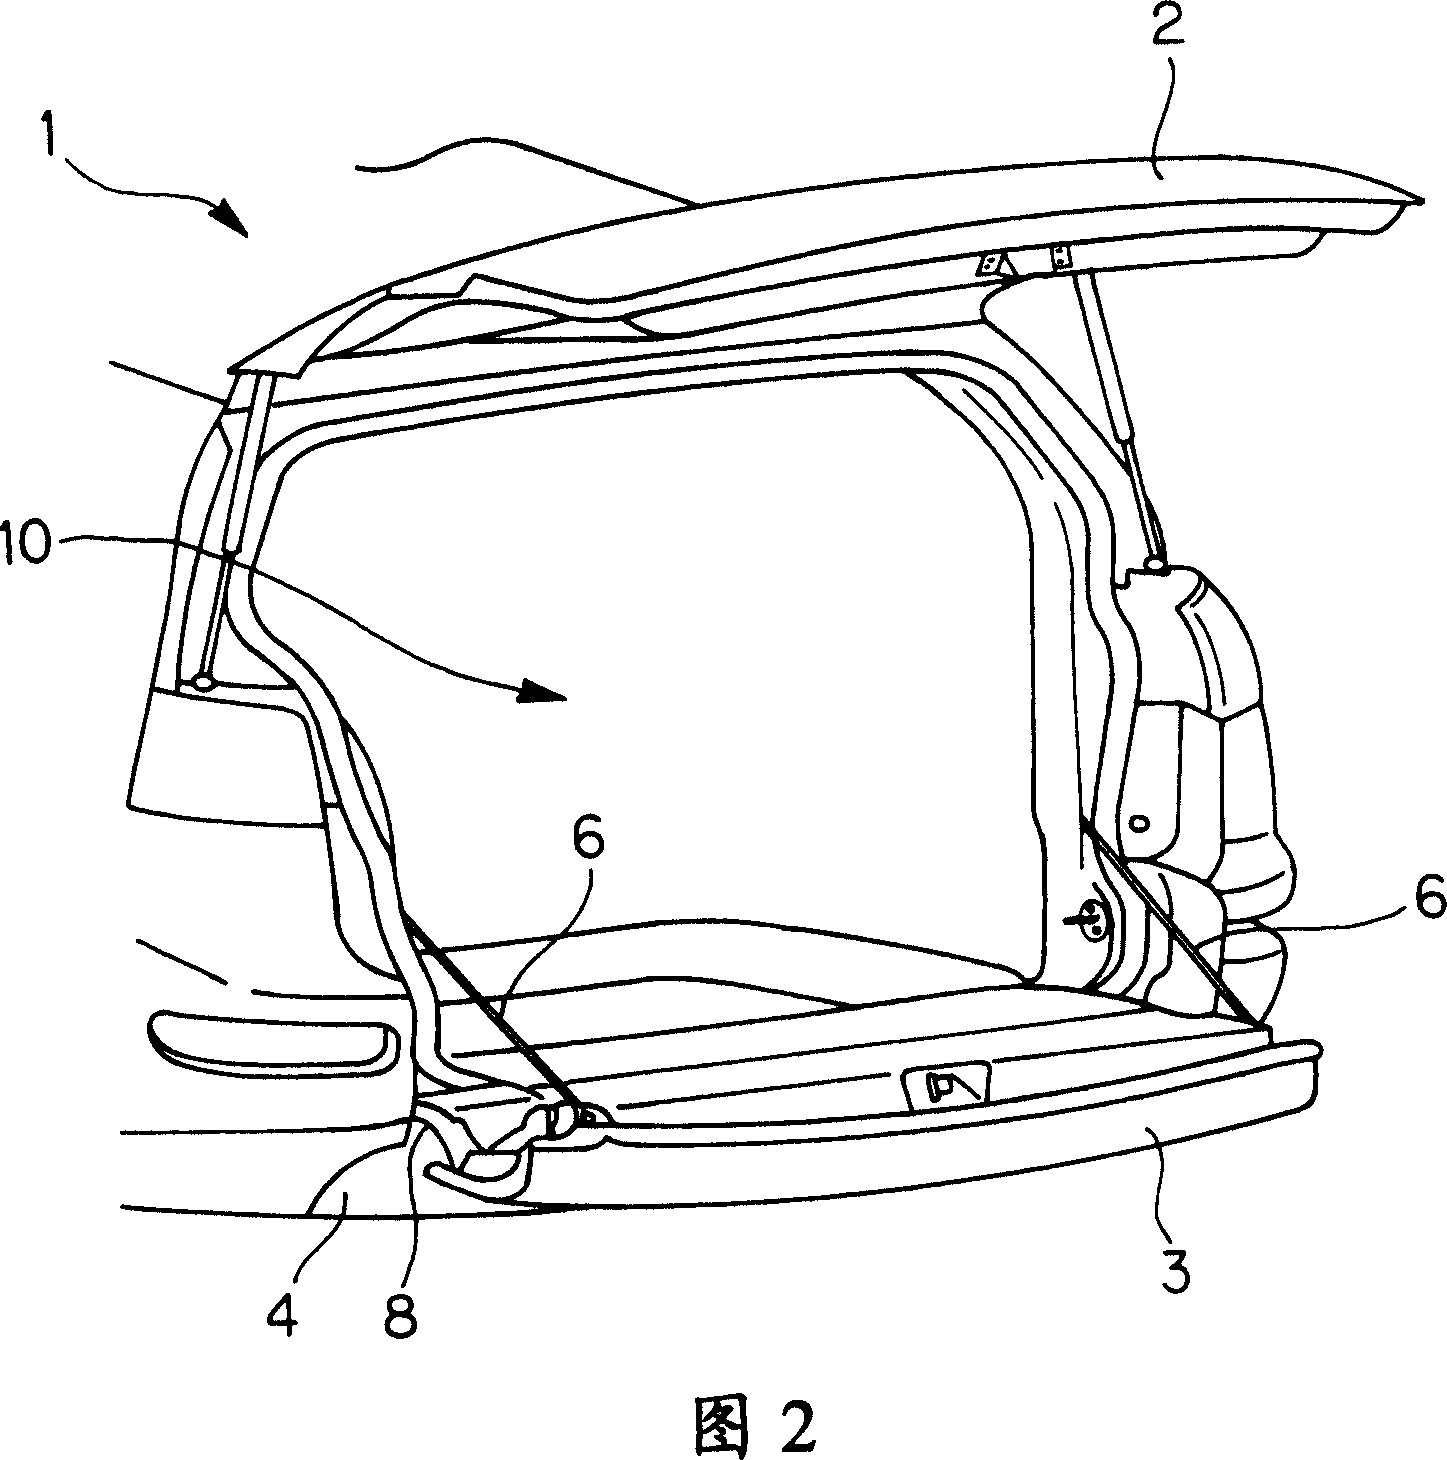 Opening and closing apparatus of vehicle